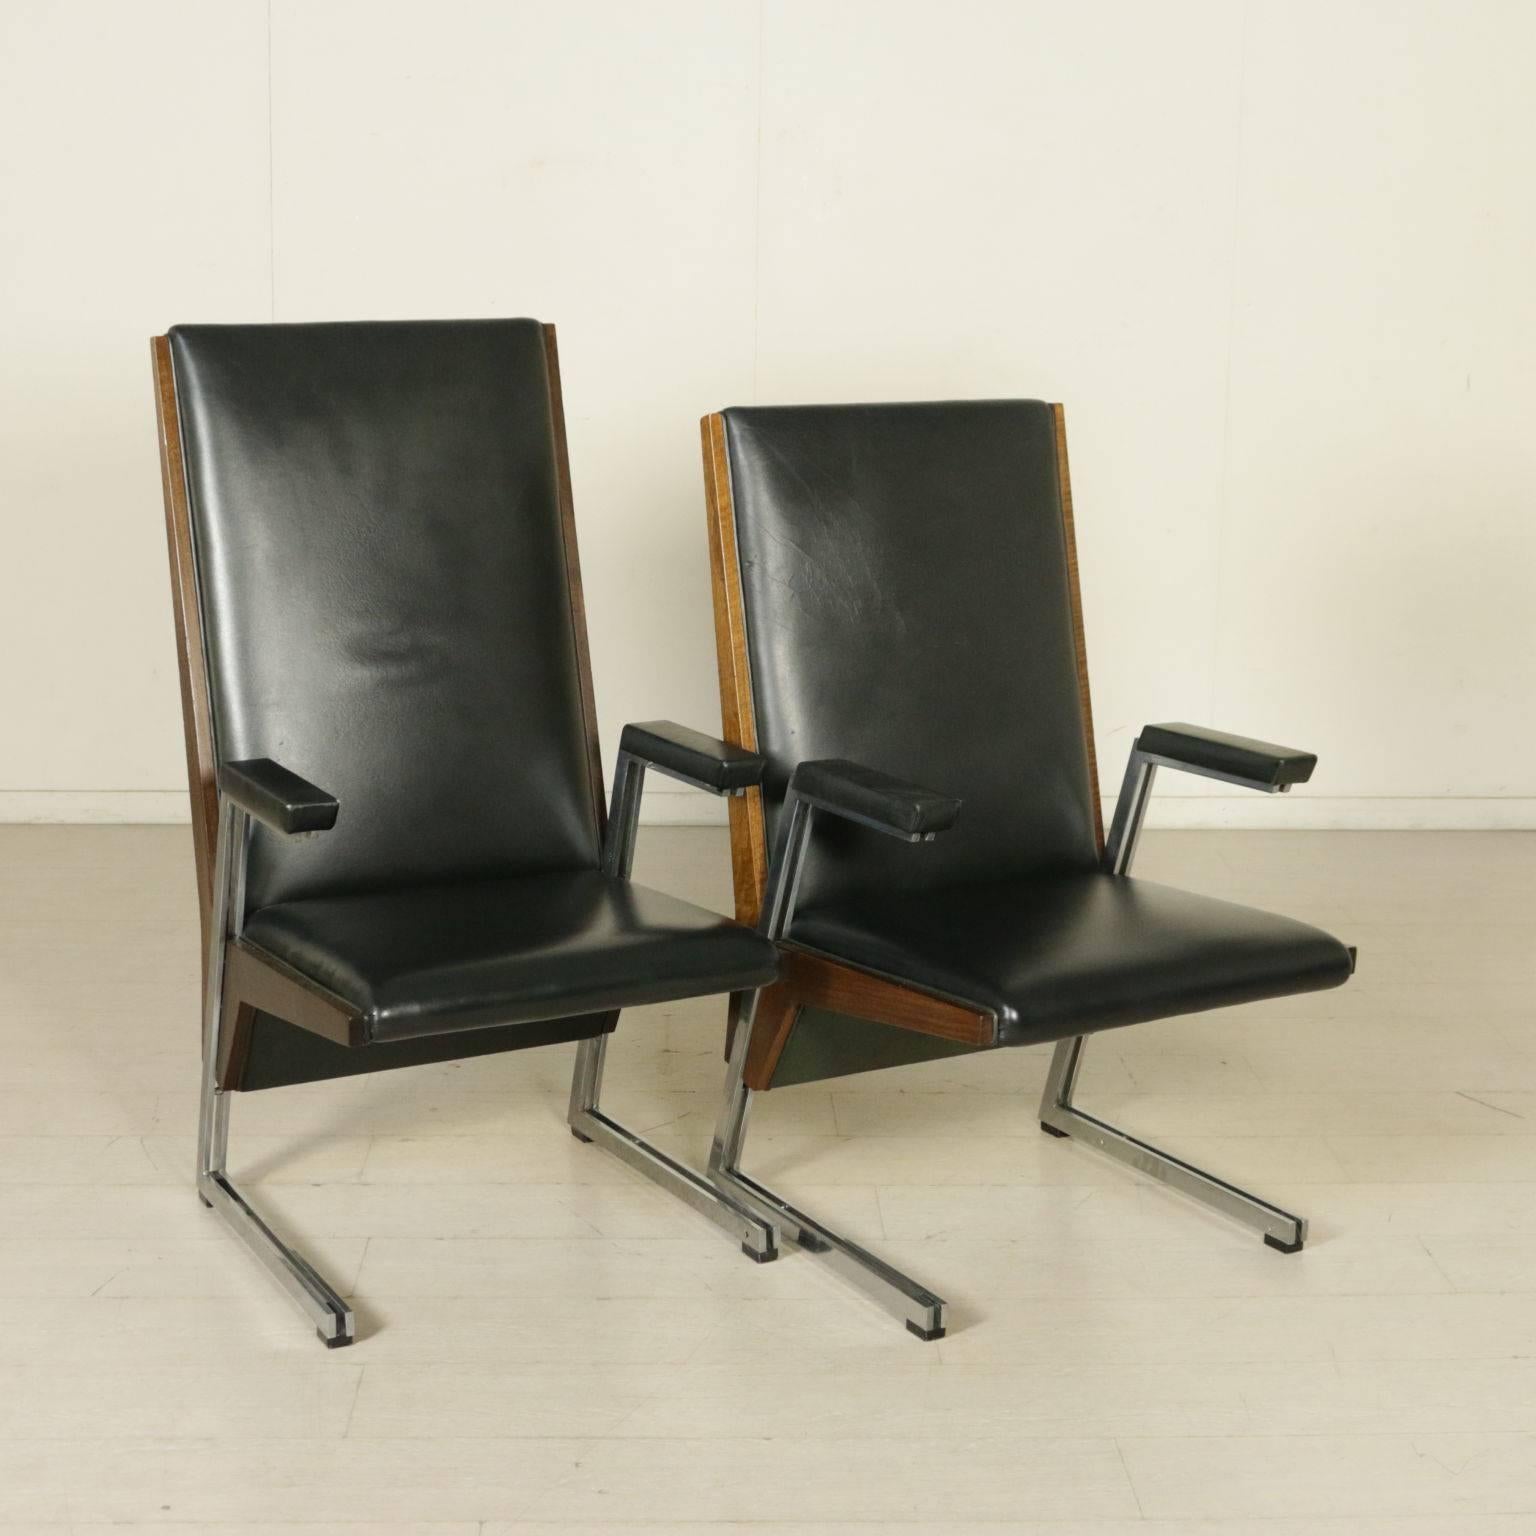 A group of eight chairs with armrests. Stained beech side bands, foam padding, leatherette upholstery, chromed metal. Manufactured in Italy, 1960s-1970s.